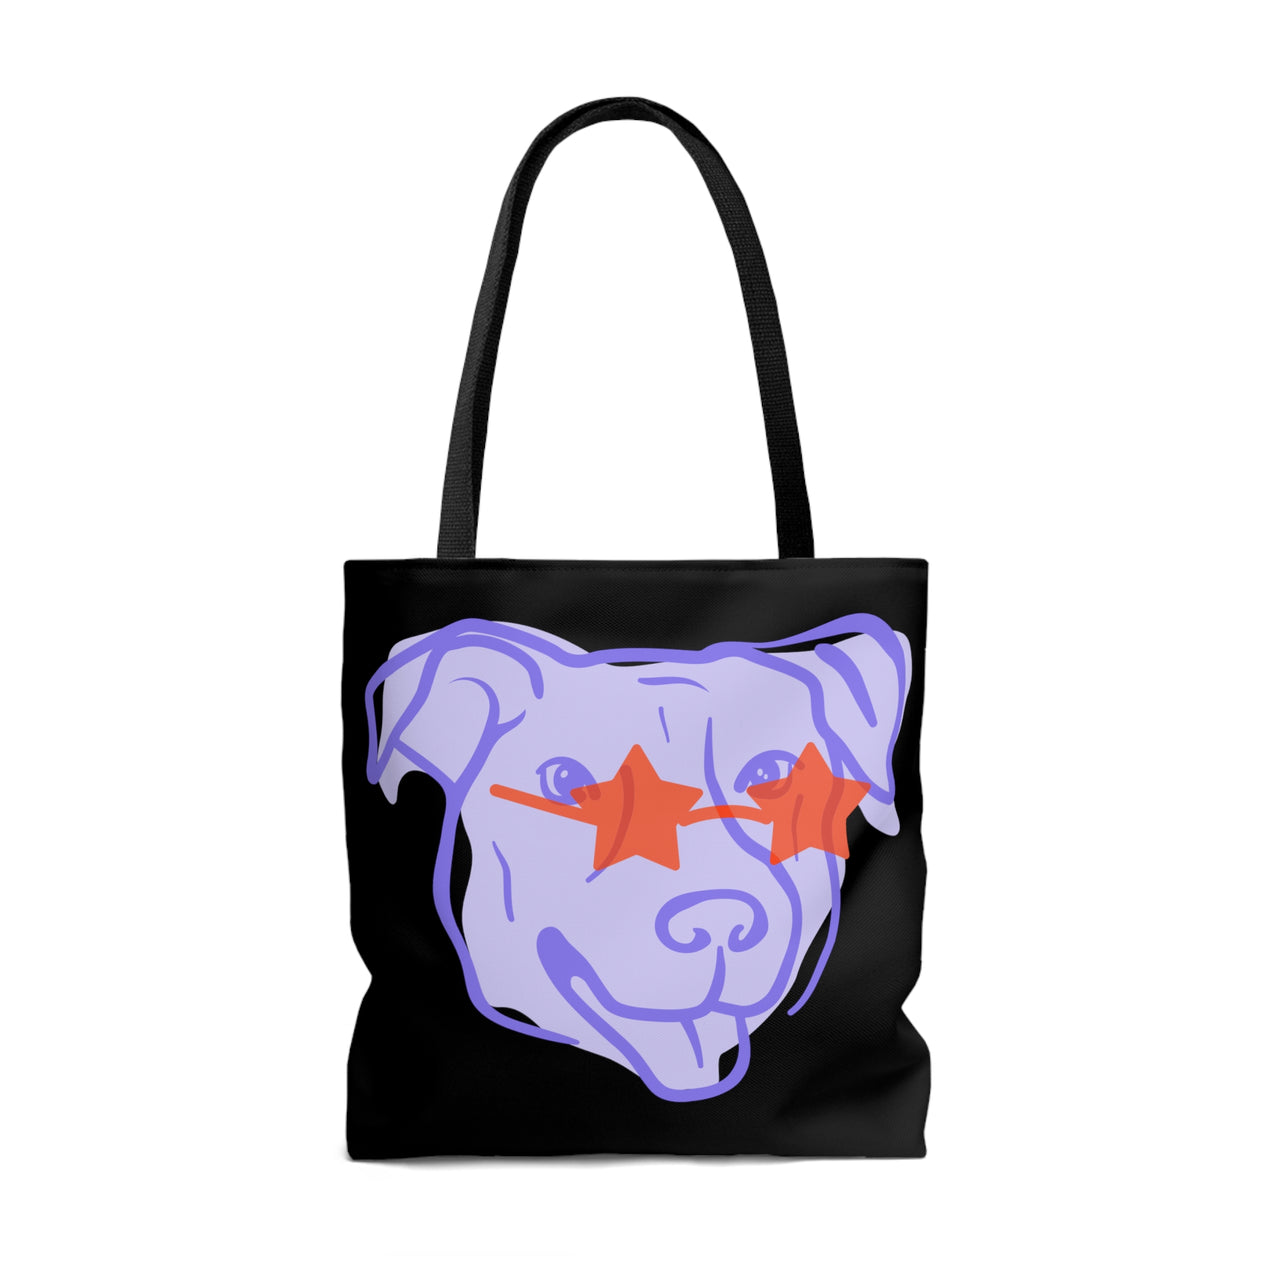 Puppy In Sunglasses Black - Large Tote Bag